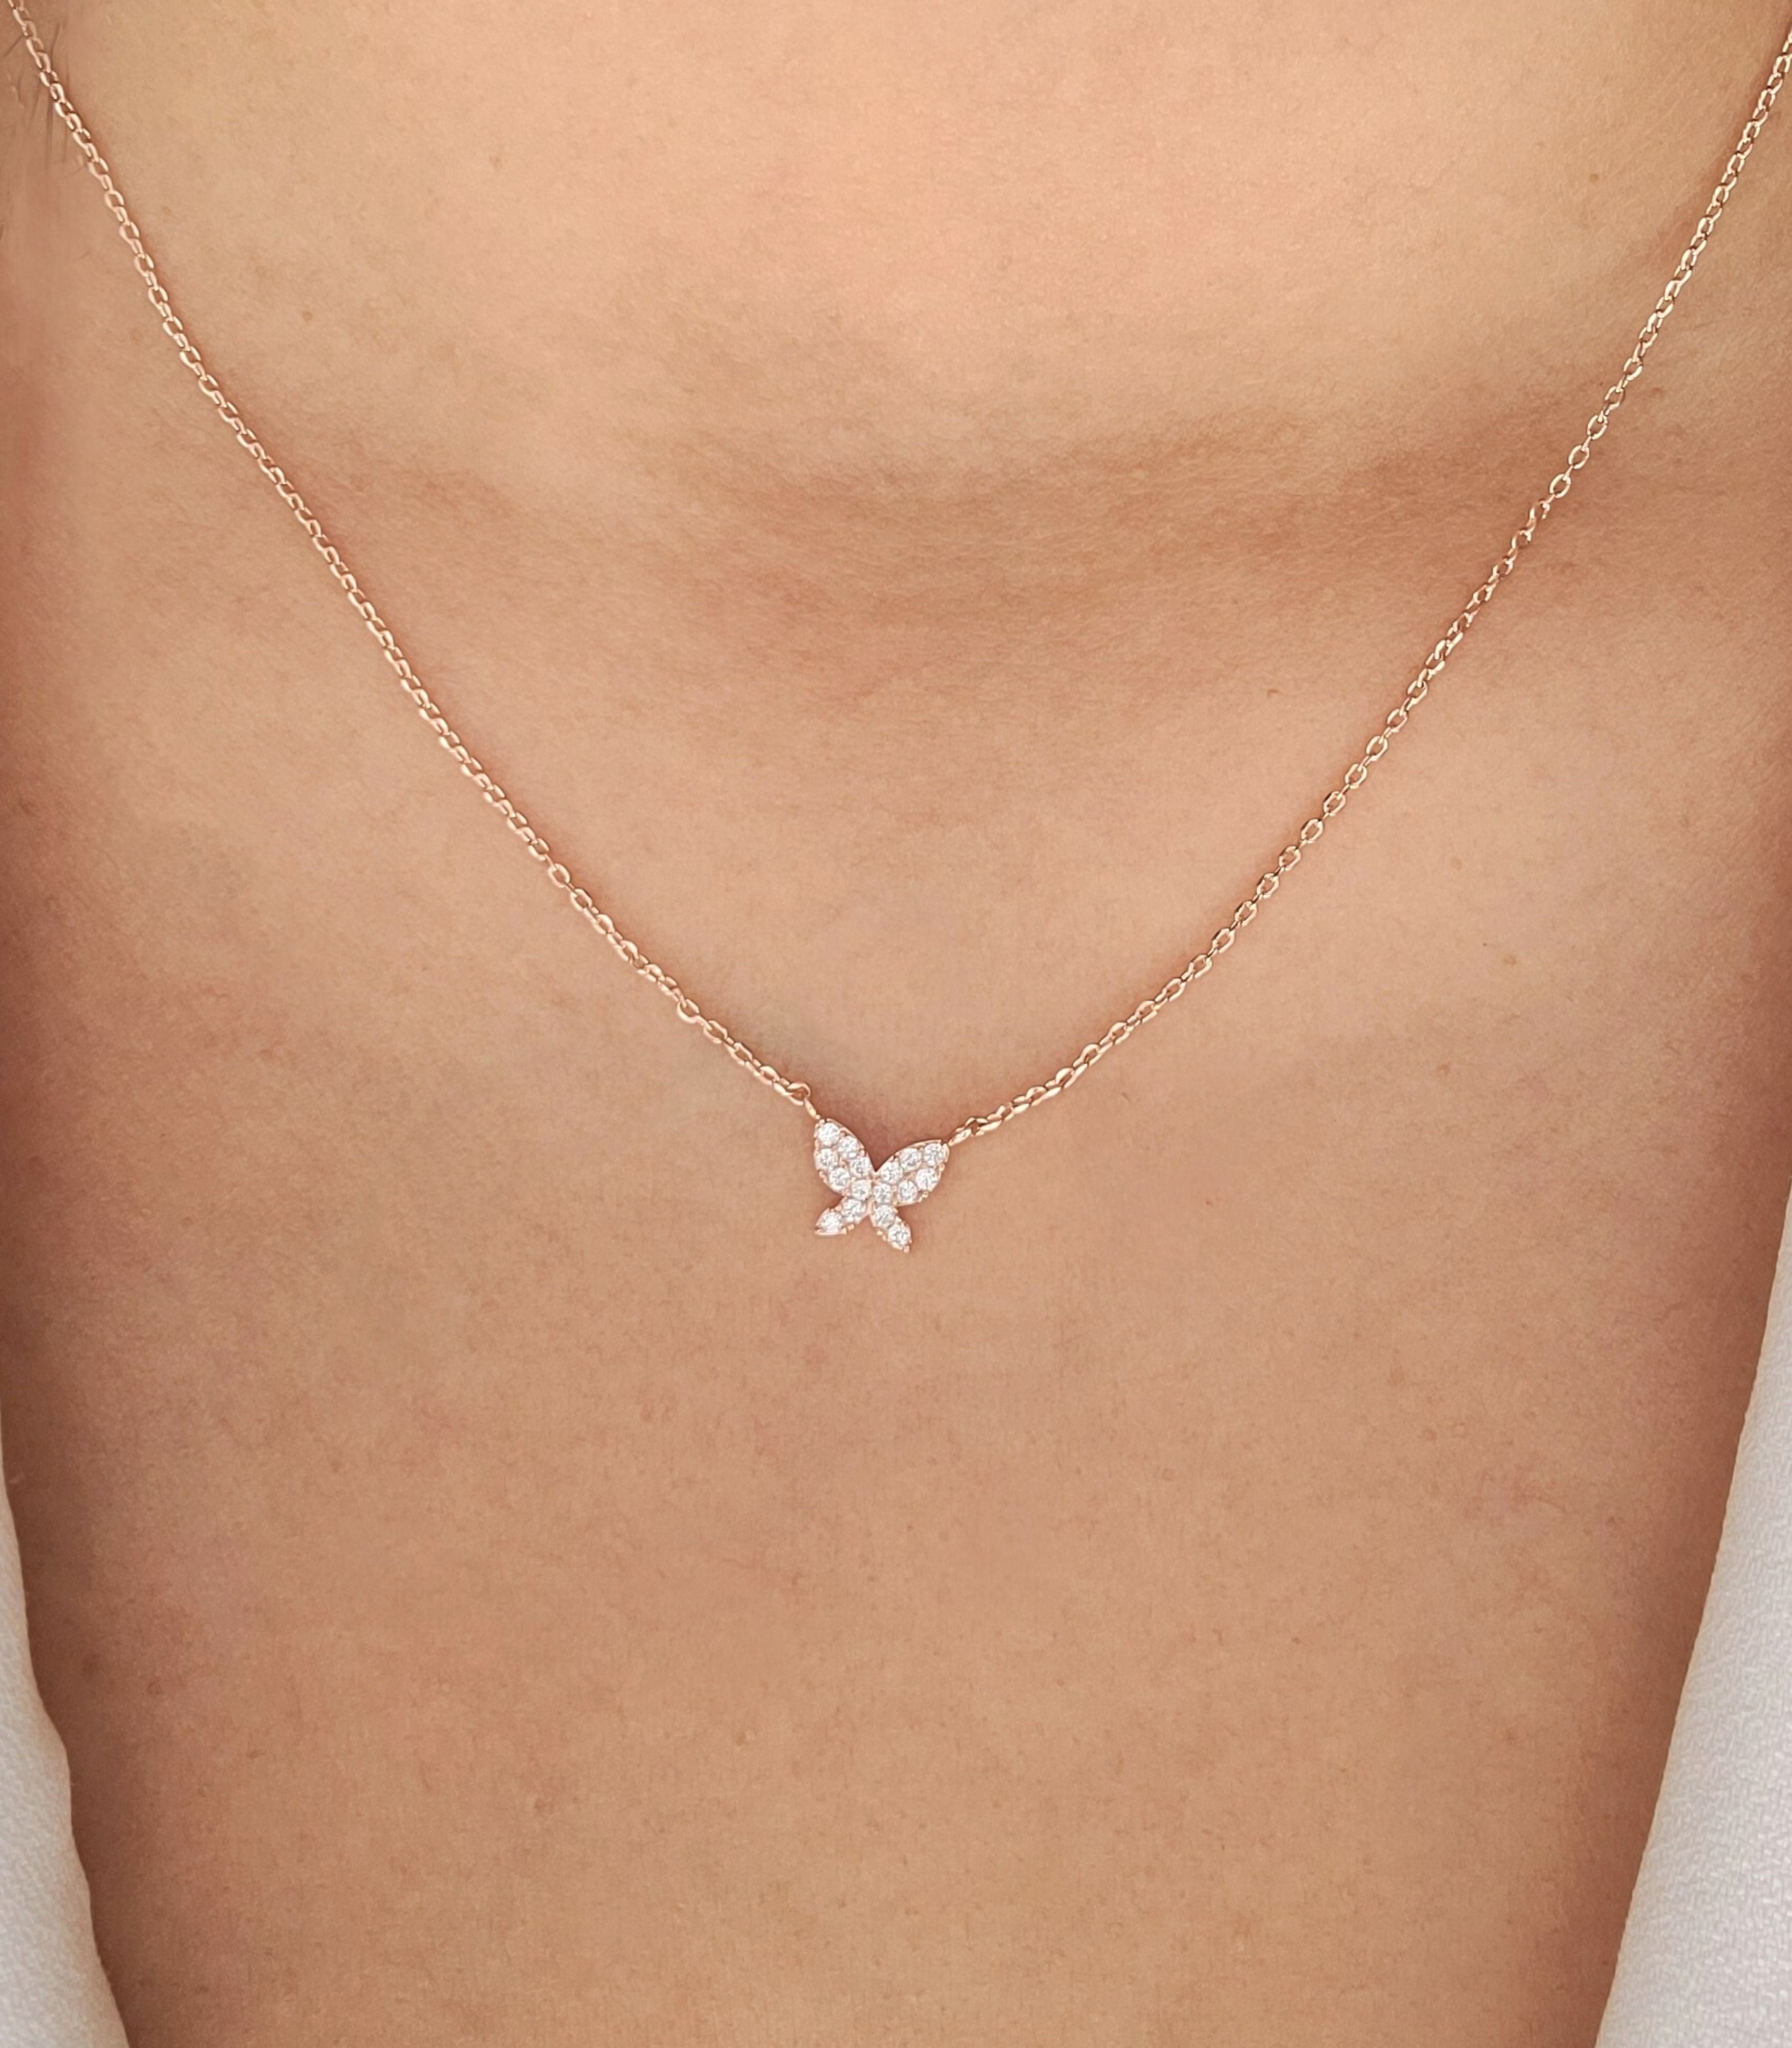 Amira butterfly necklace